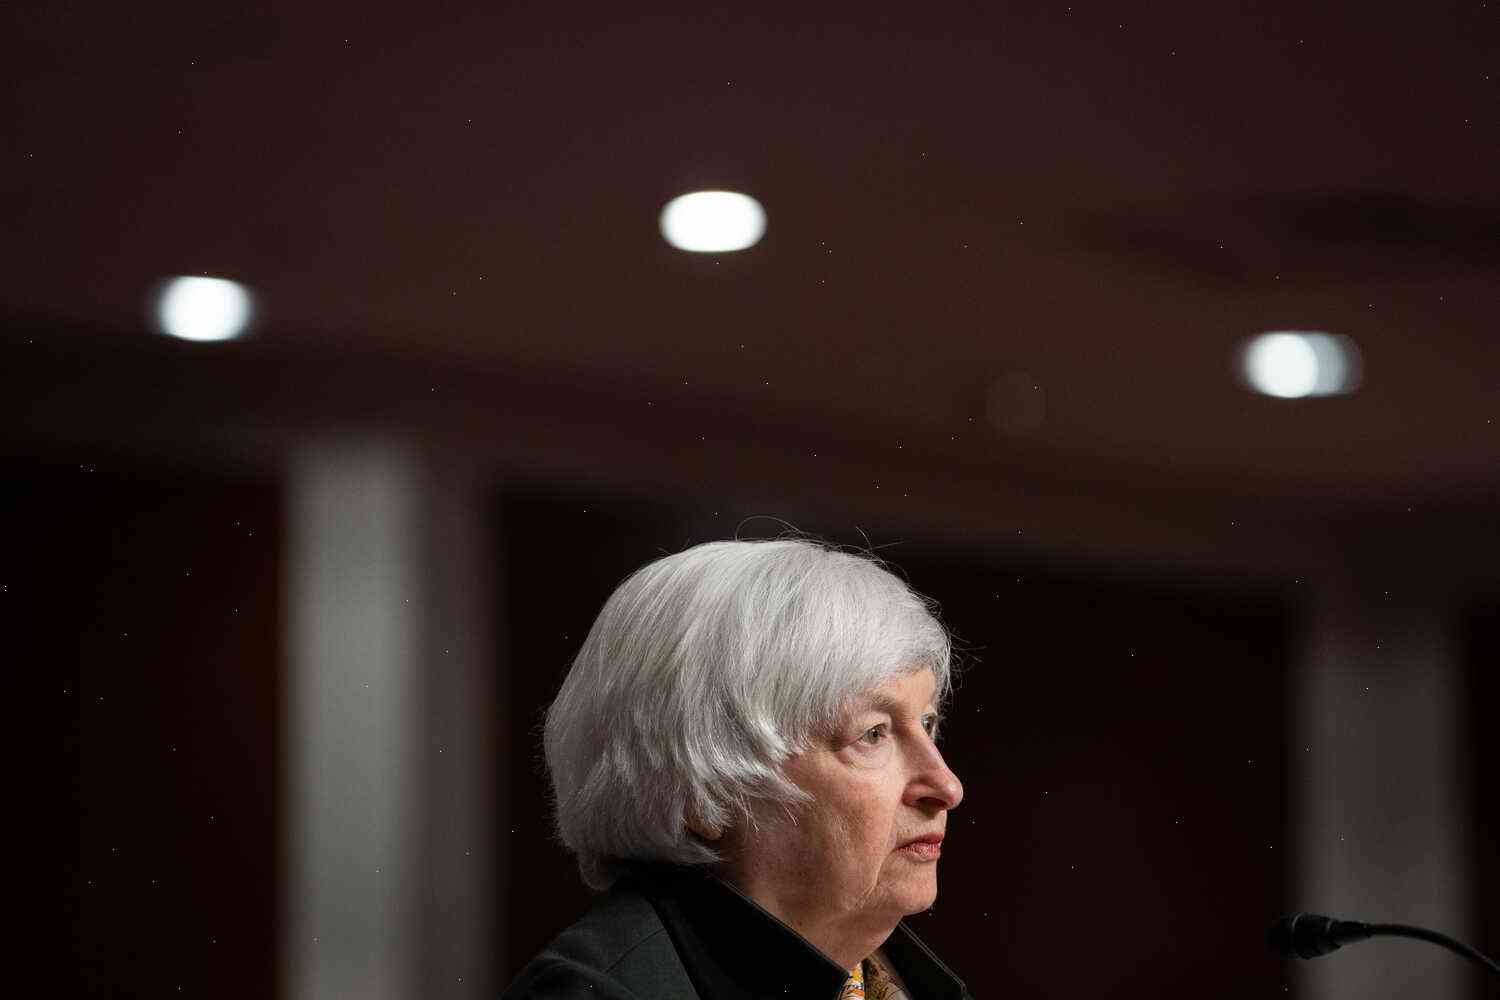 Yellen Says Inflation's Time to End 'Transitory'